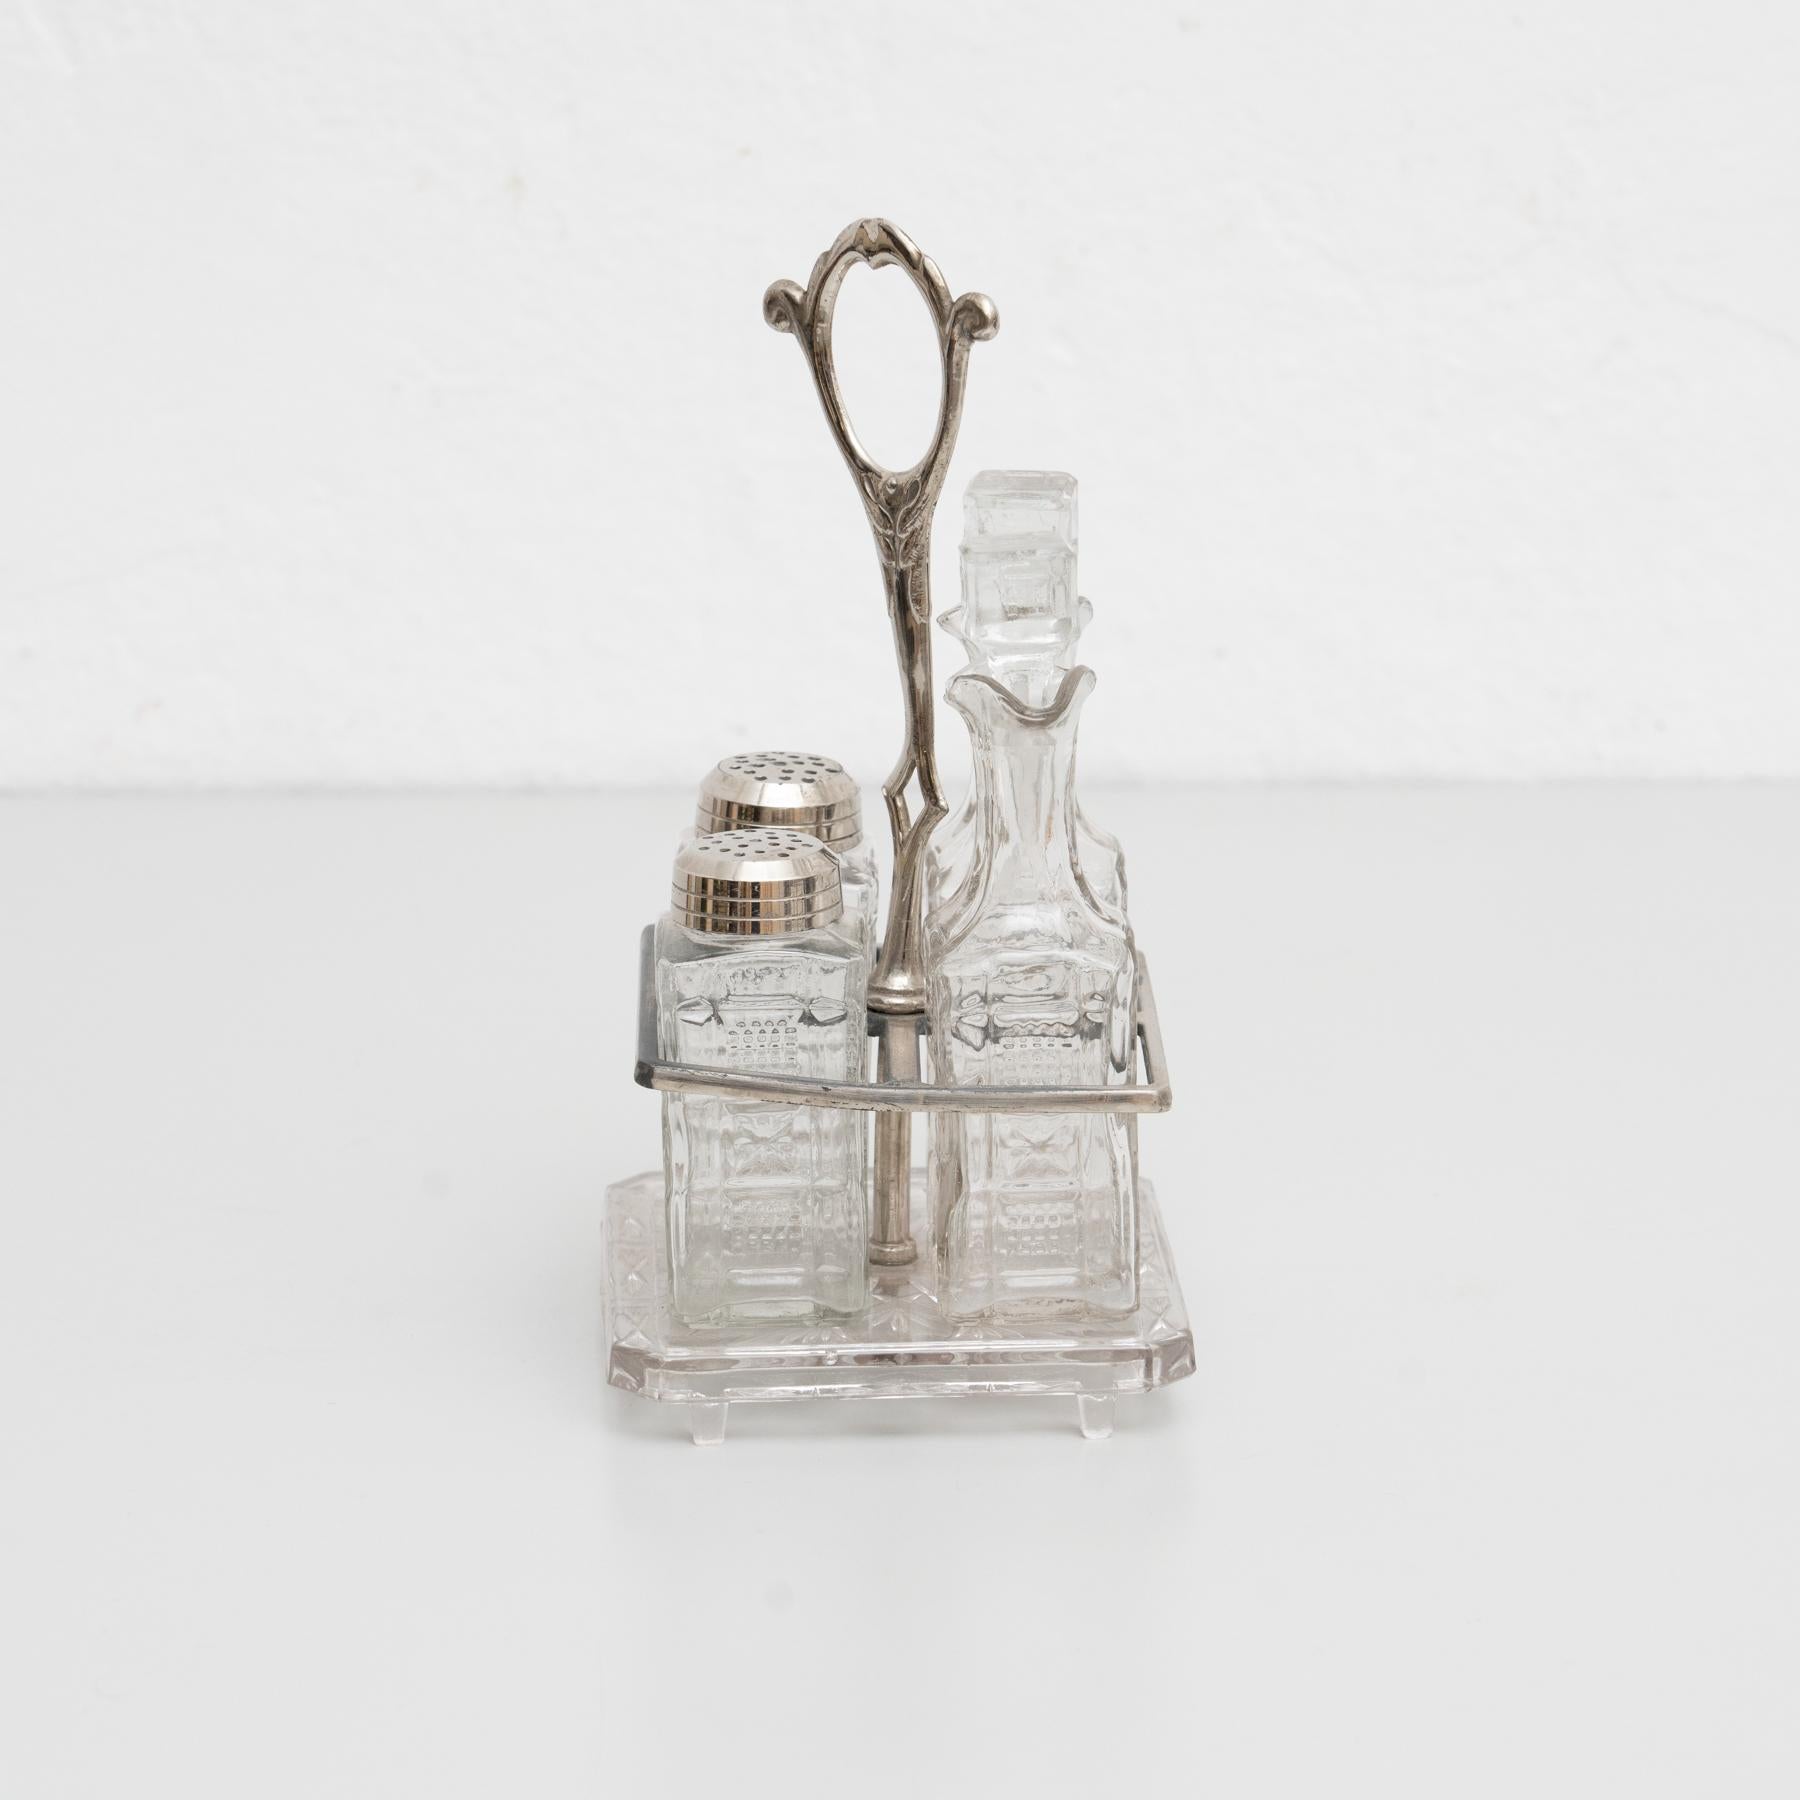 Catalan Glass Cruet set, circa 1940
 Manufactured in Spain.

In original condition, with minor wear consistent of age and use, preserving a beautiful patina.

Material:
Glass
Metal.